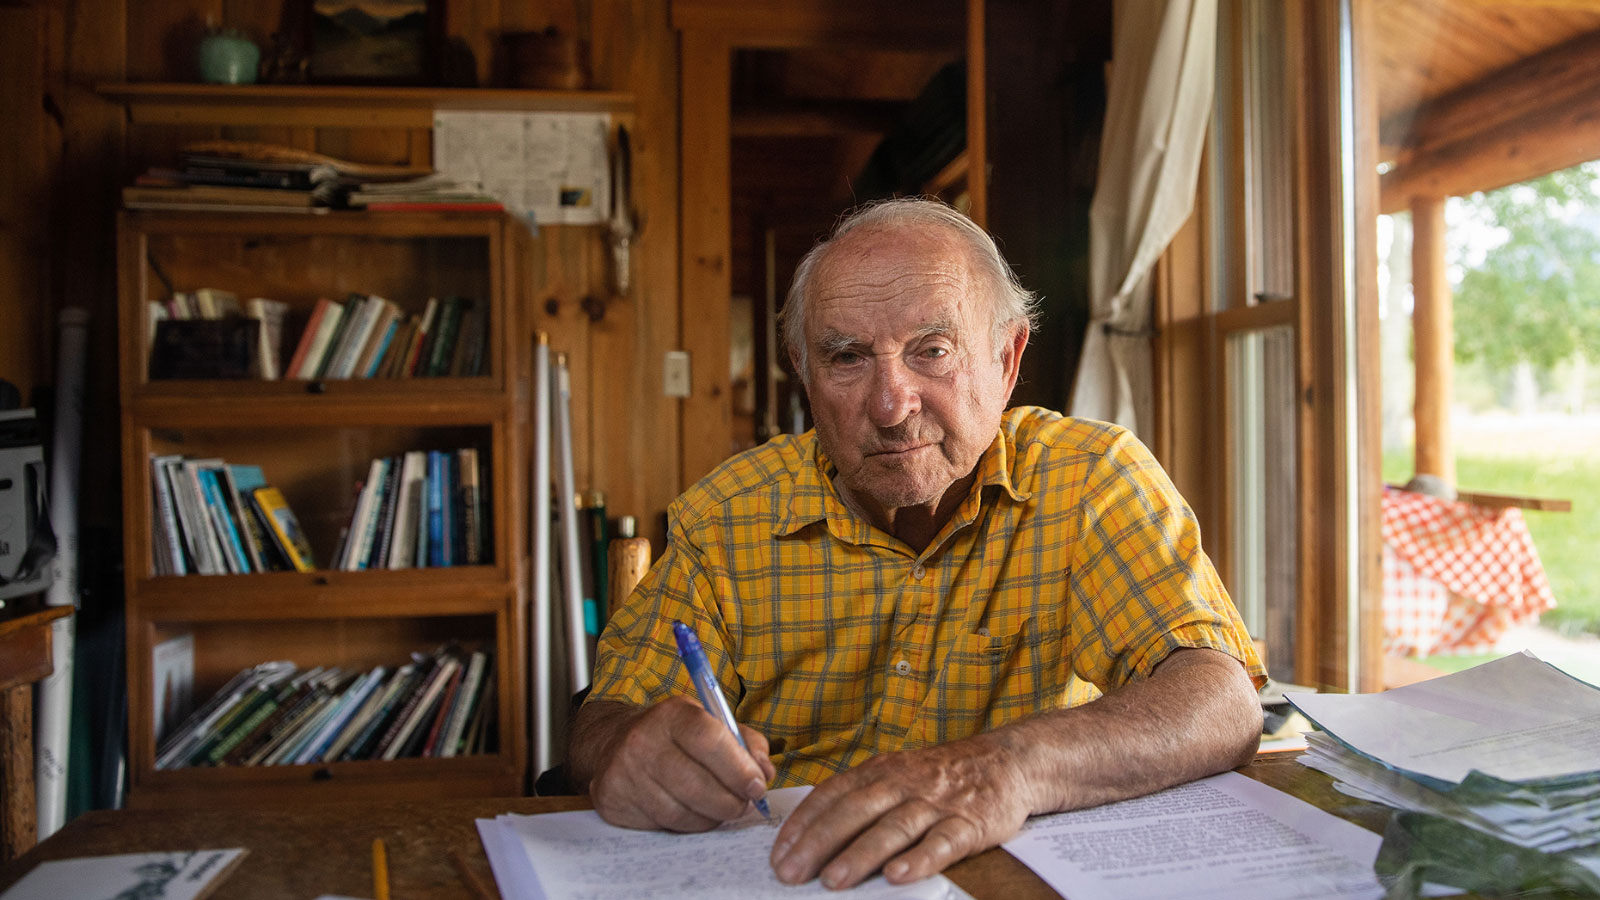 Portrait of Yvon Chouinard, the founder of Patagonia, seated at a desk writing on a piece of paper and looking at the camera